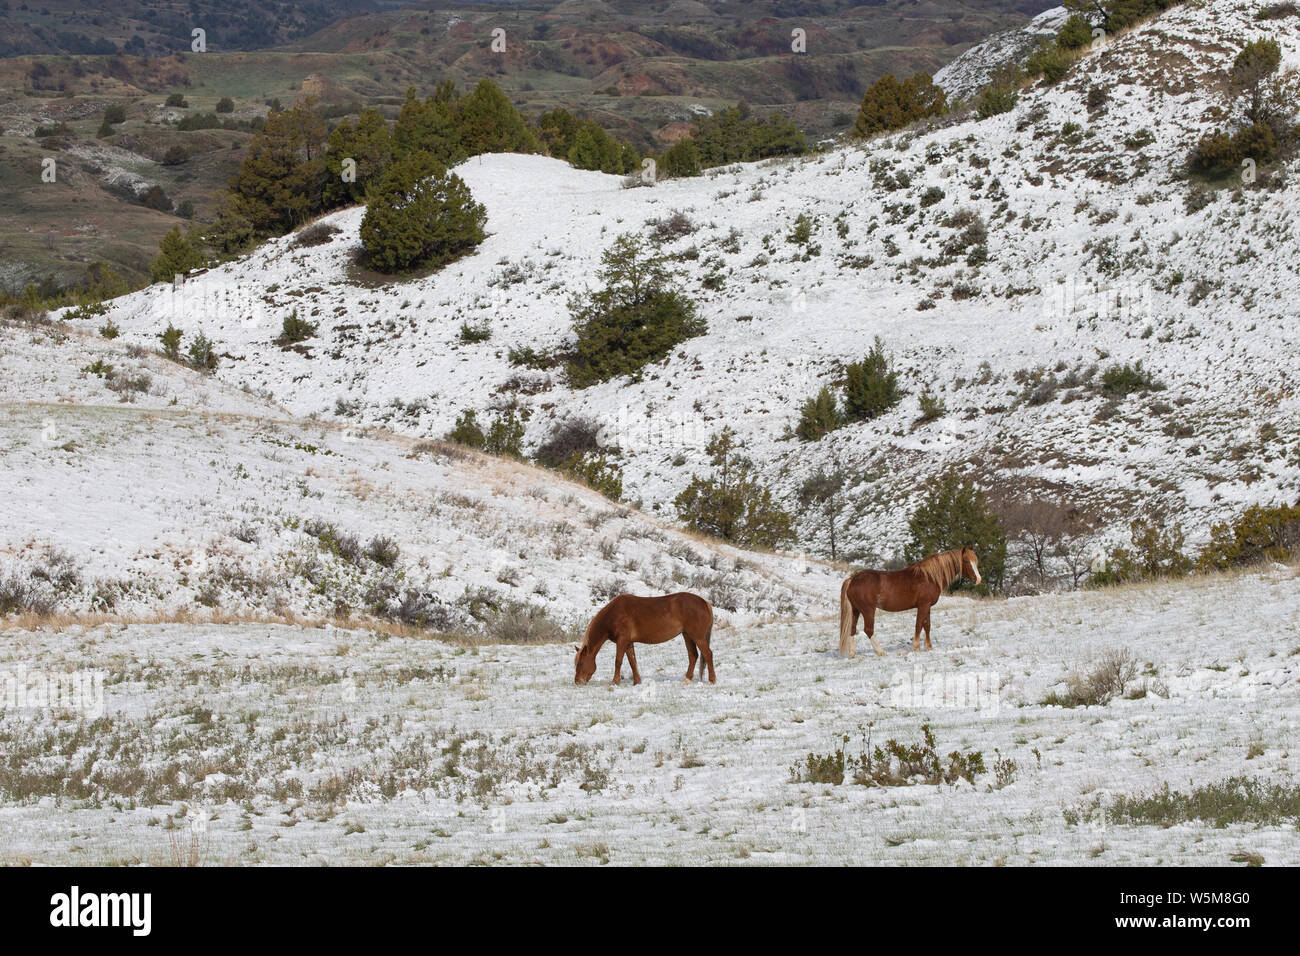 Feral (Wild) Horse, Theodore Roosevelt National Park, Flax and Michief with snow in higher elevation Stock Photo